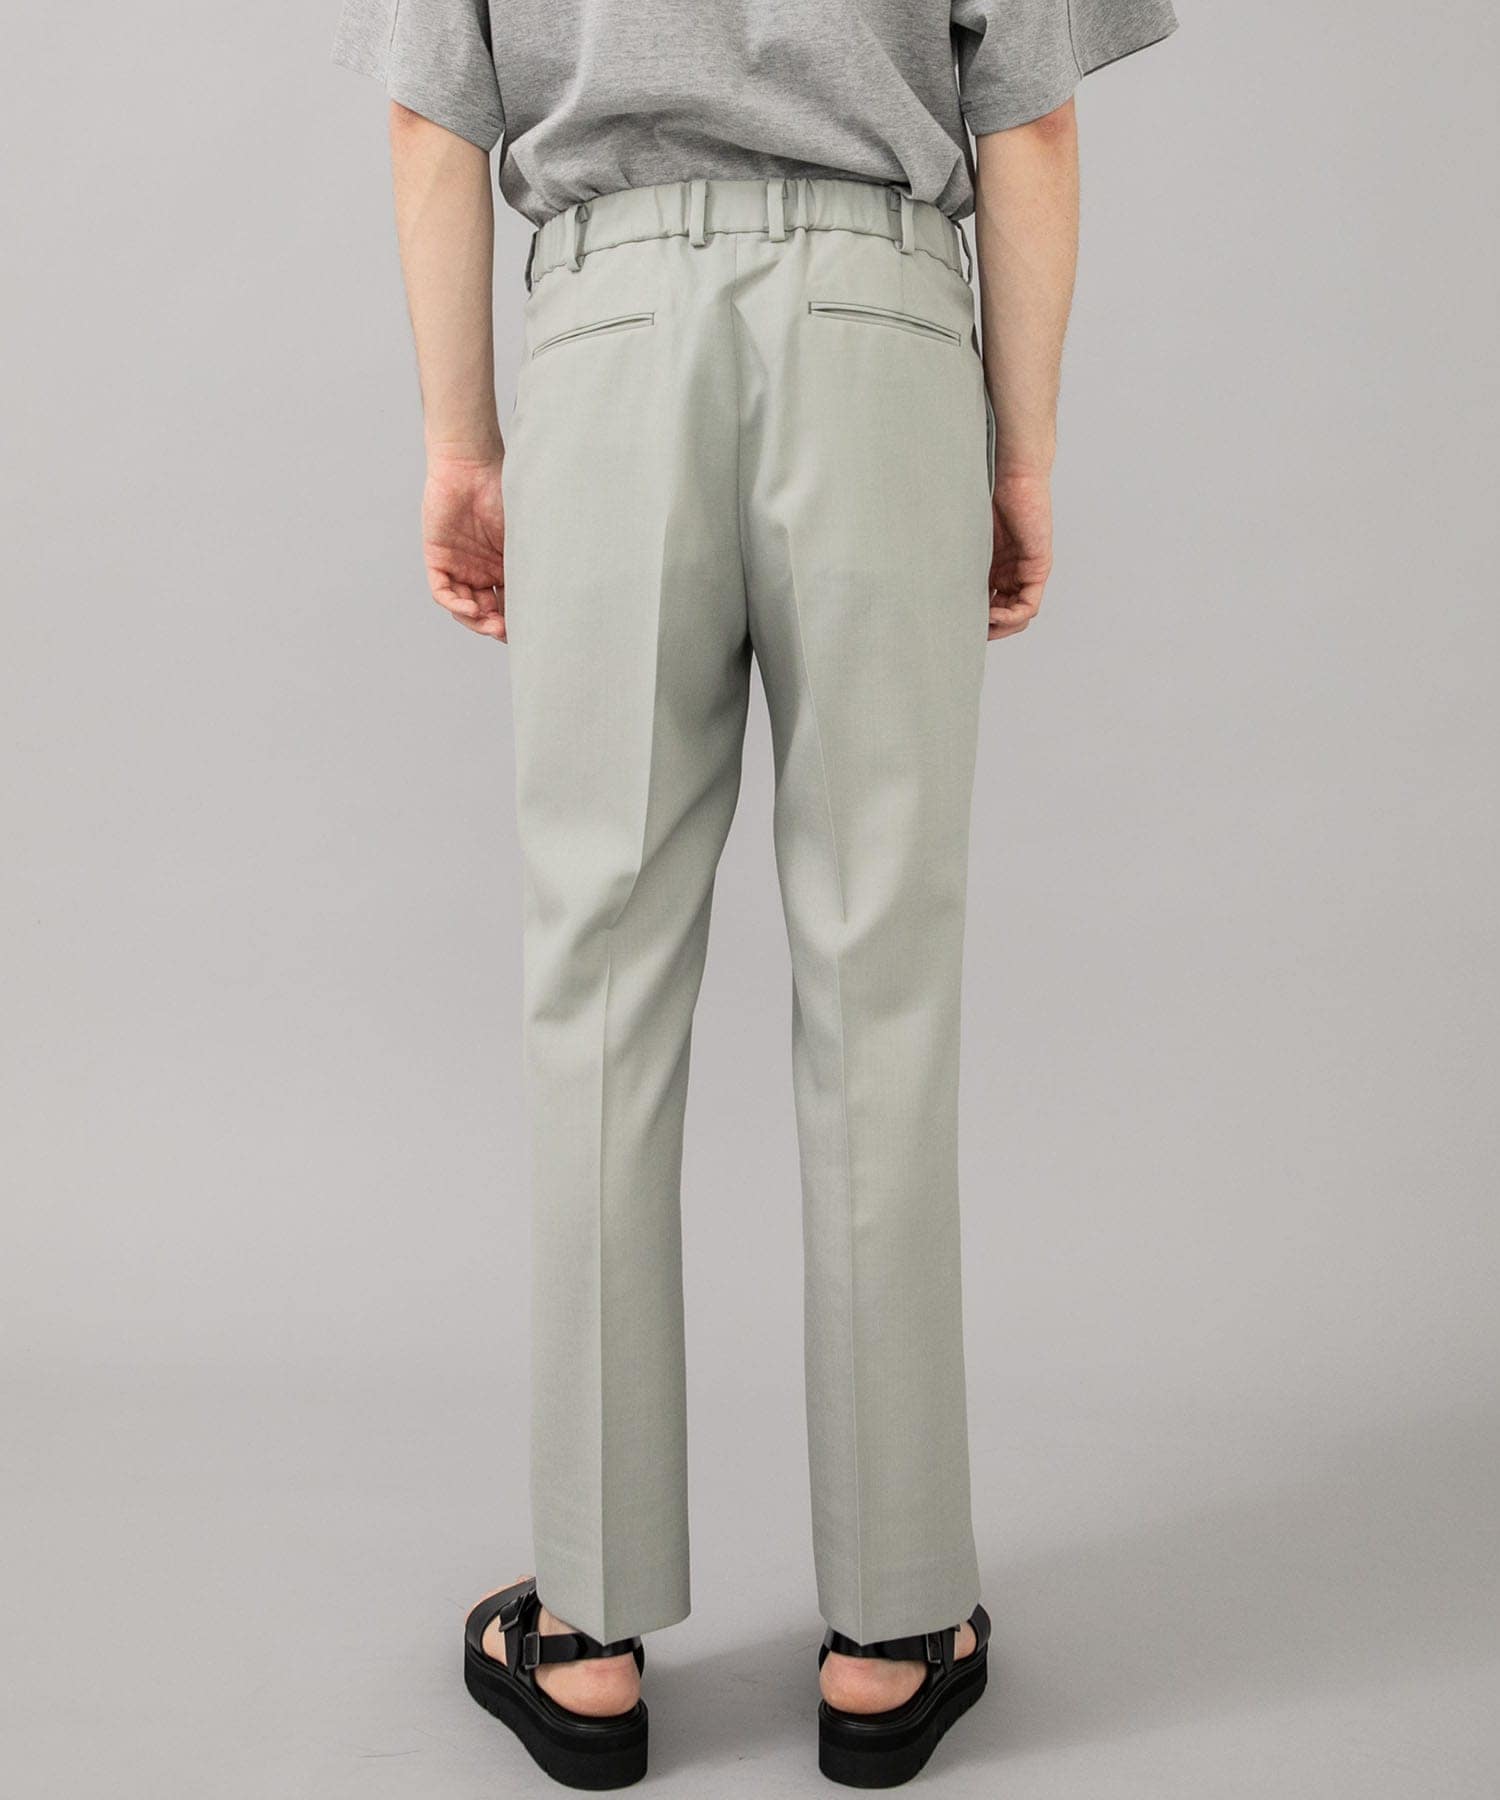 MARKA STRAIGHT FIT TROUSERS サイズ:1(S)